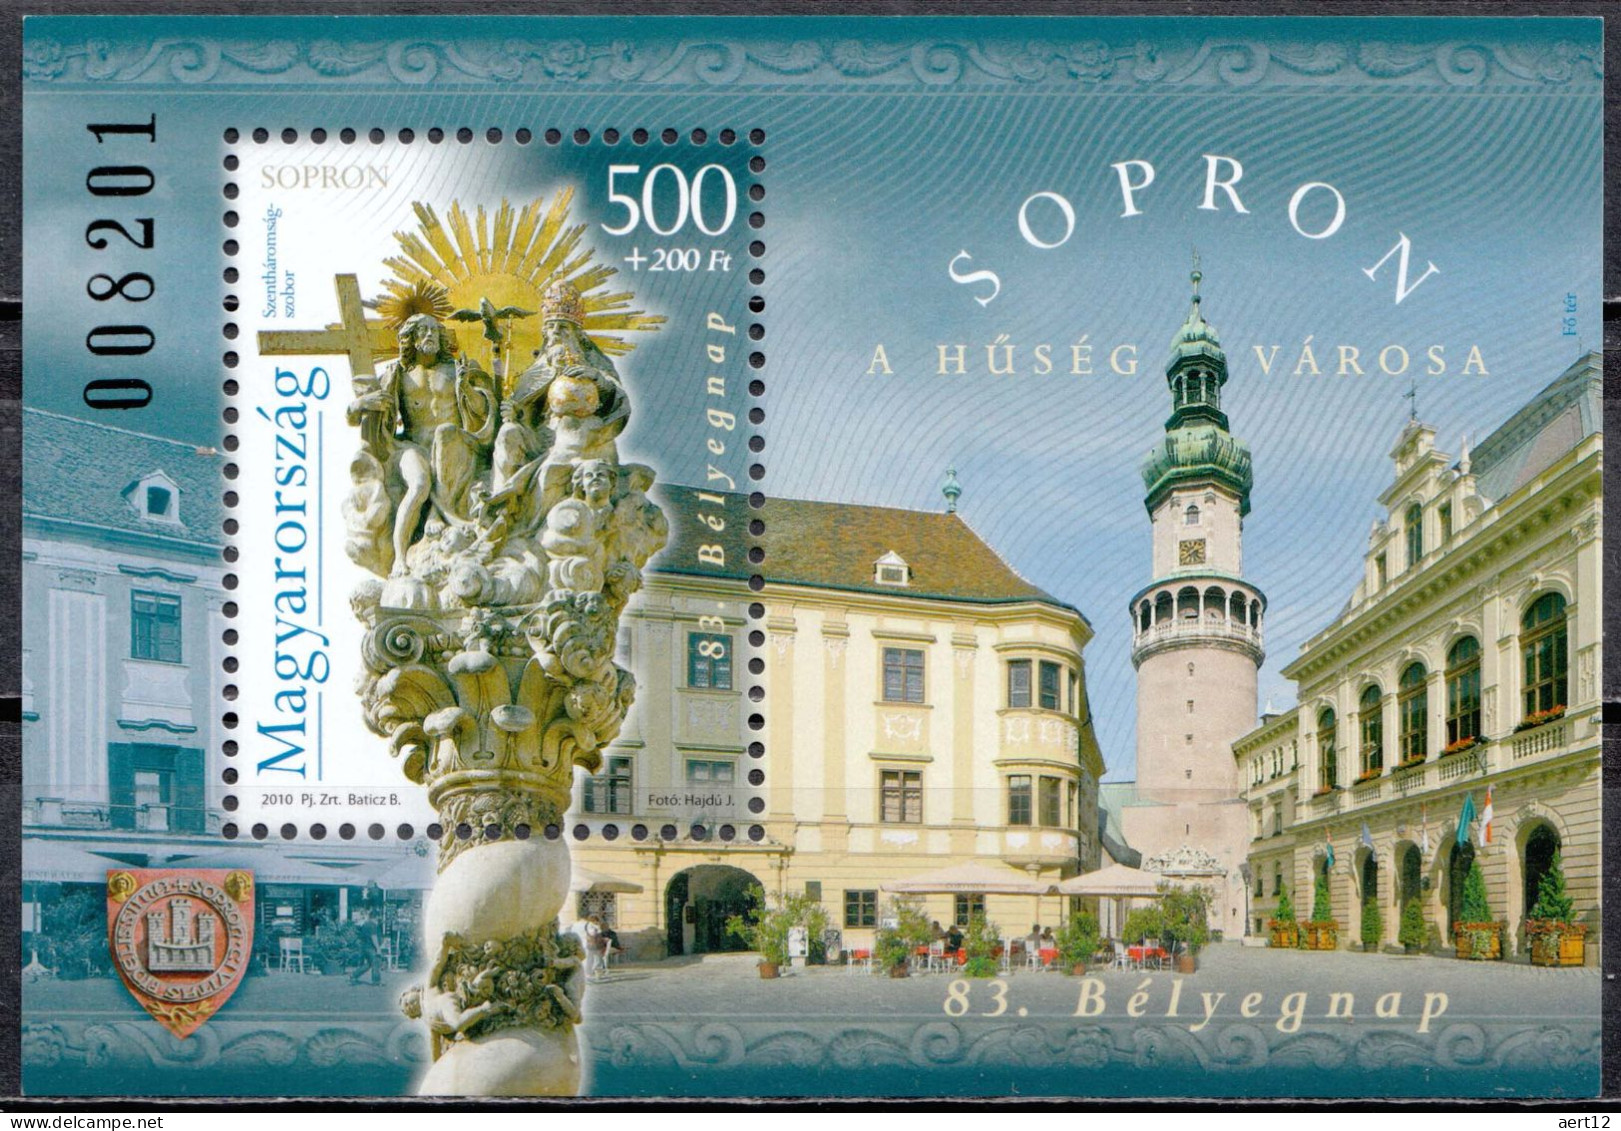 2010, Hungary, City Of Sopron, Architecture, Religion, Sculptures, Stamp Day, Souvenir Sheet, MNH(**), HU BL332 - Neufs